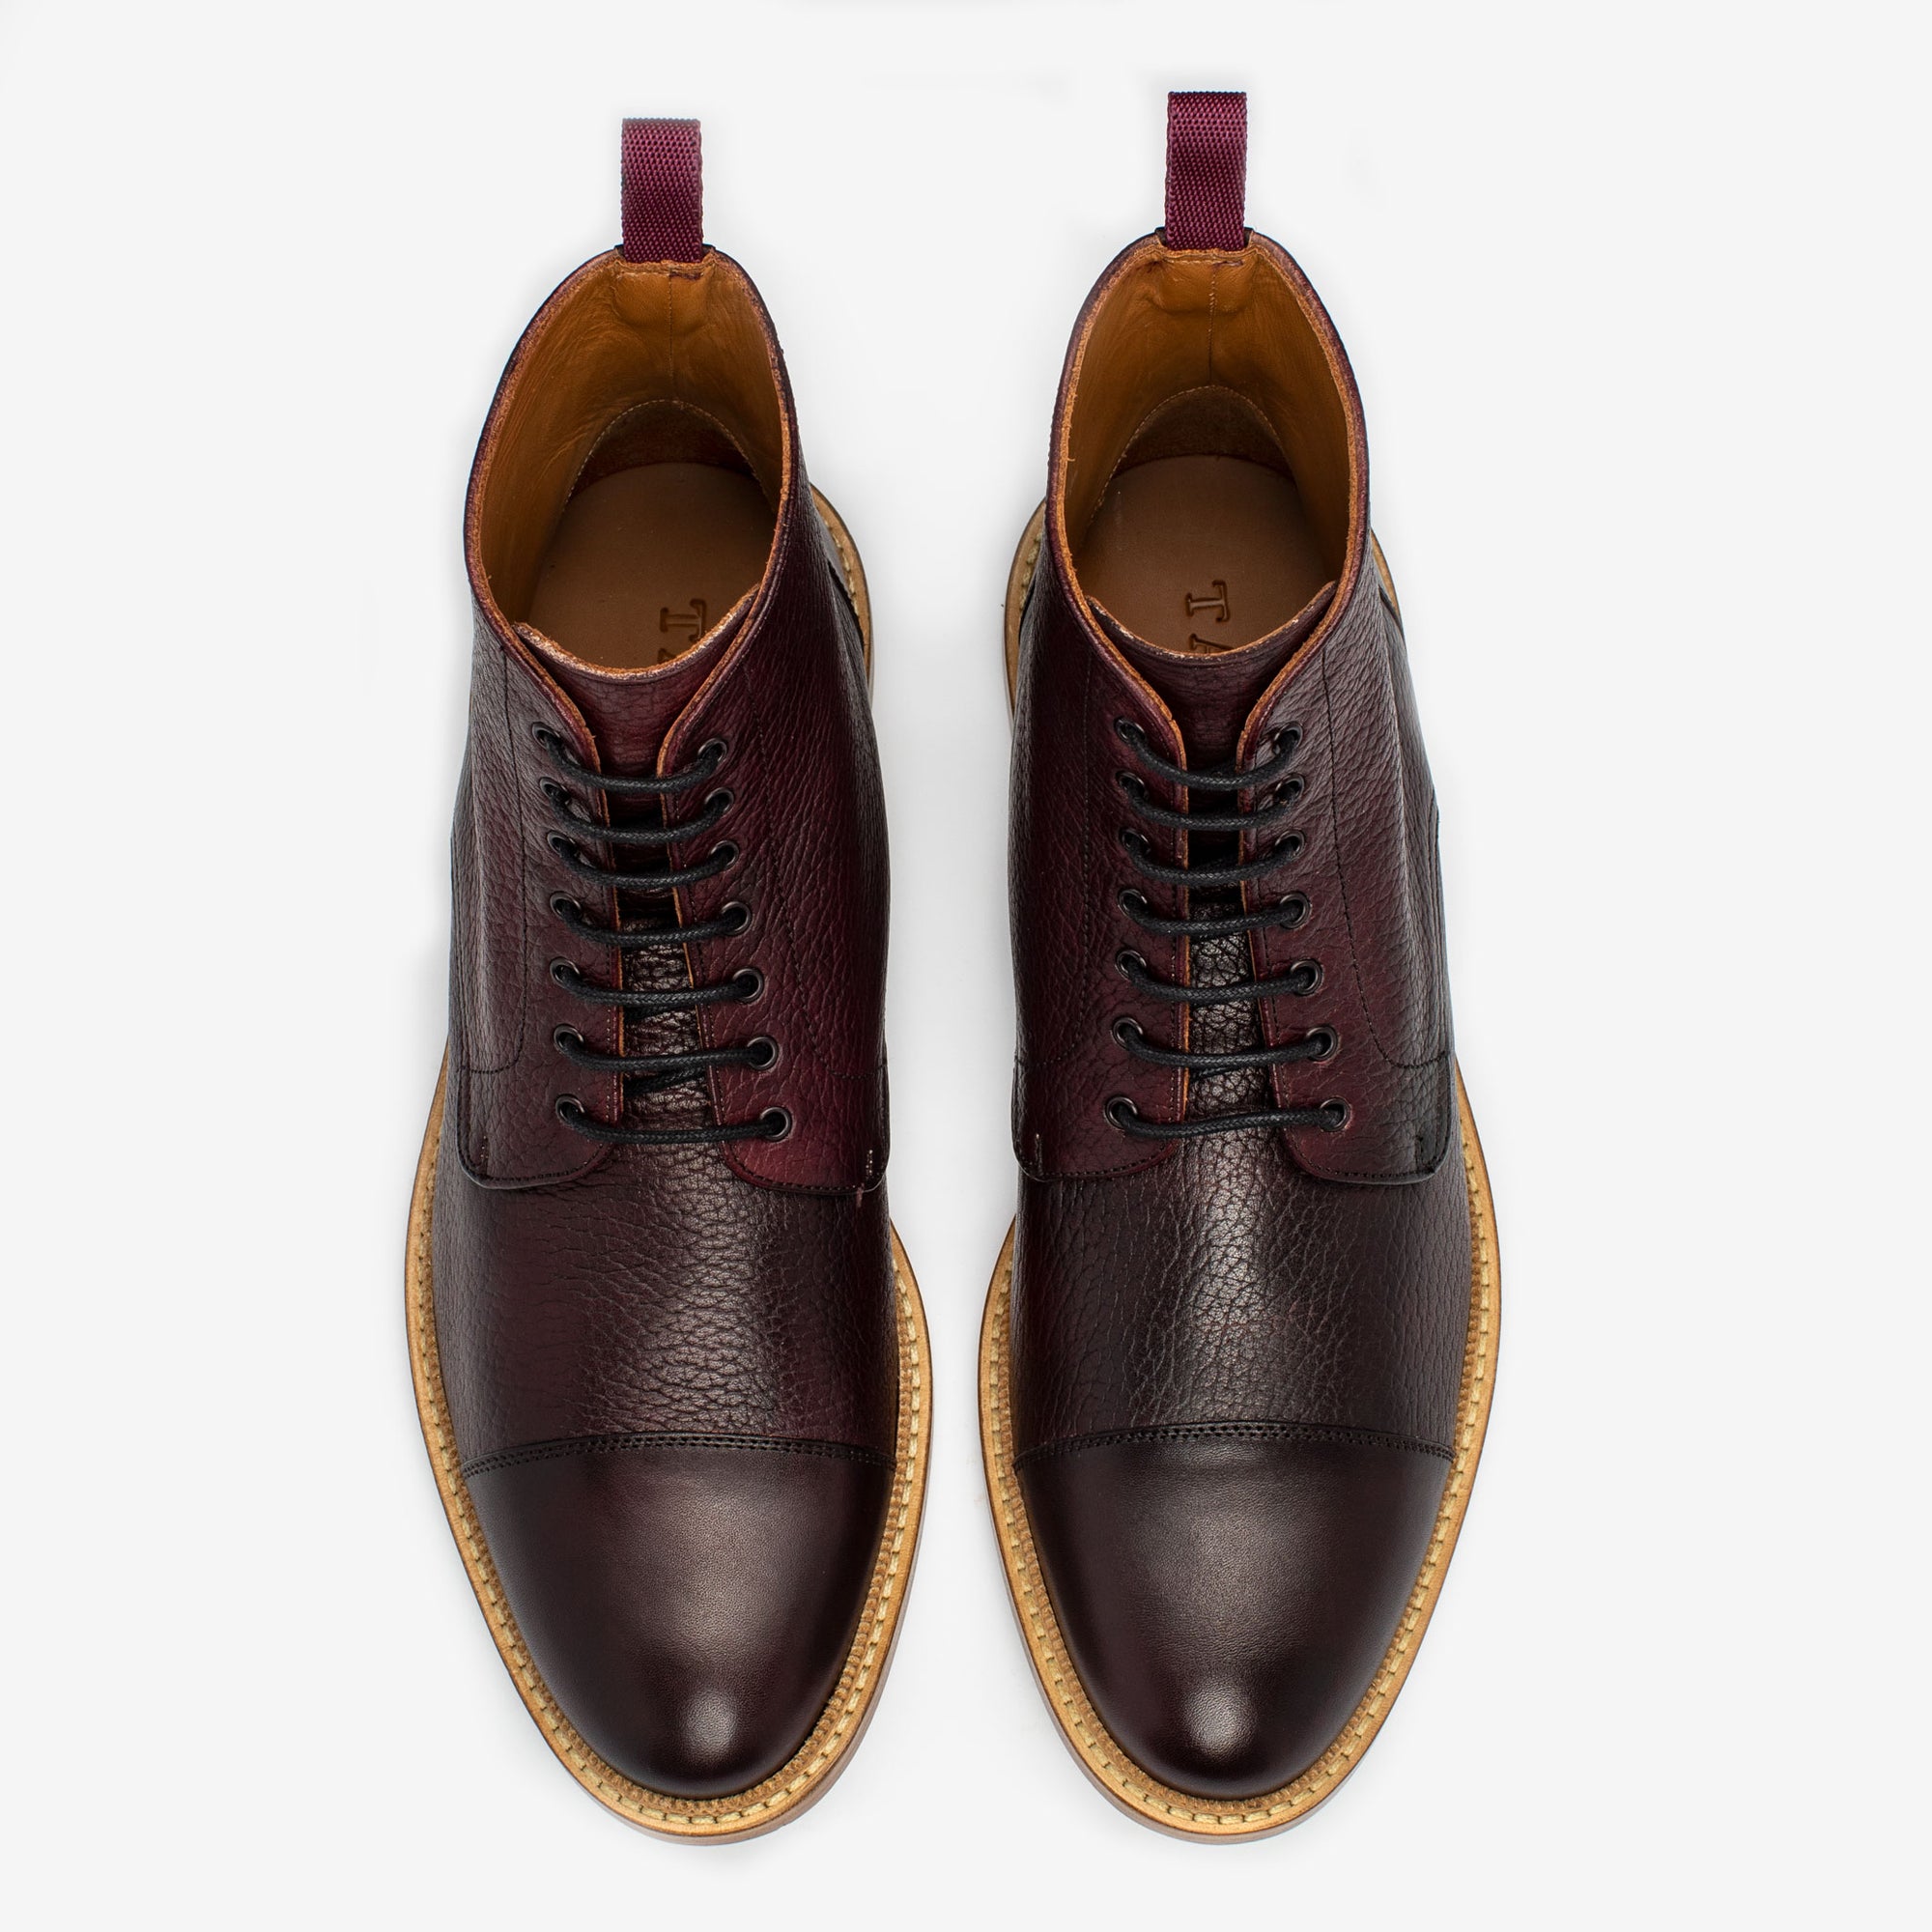 The Rome Boot in Oxblood overhead